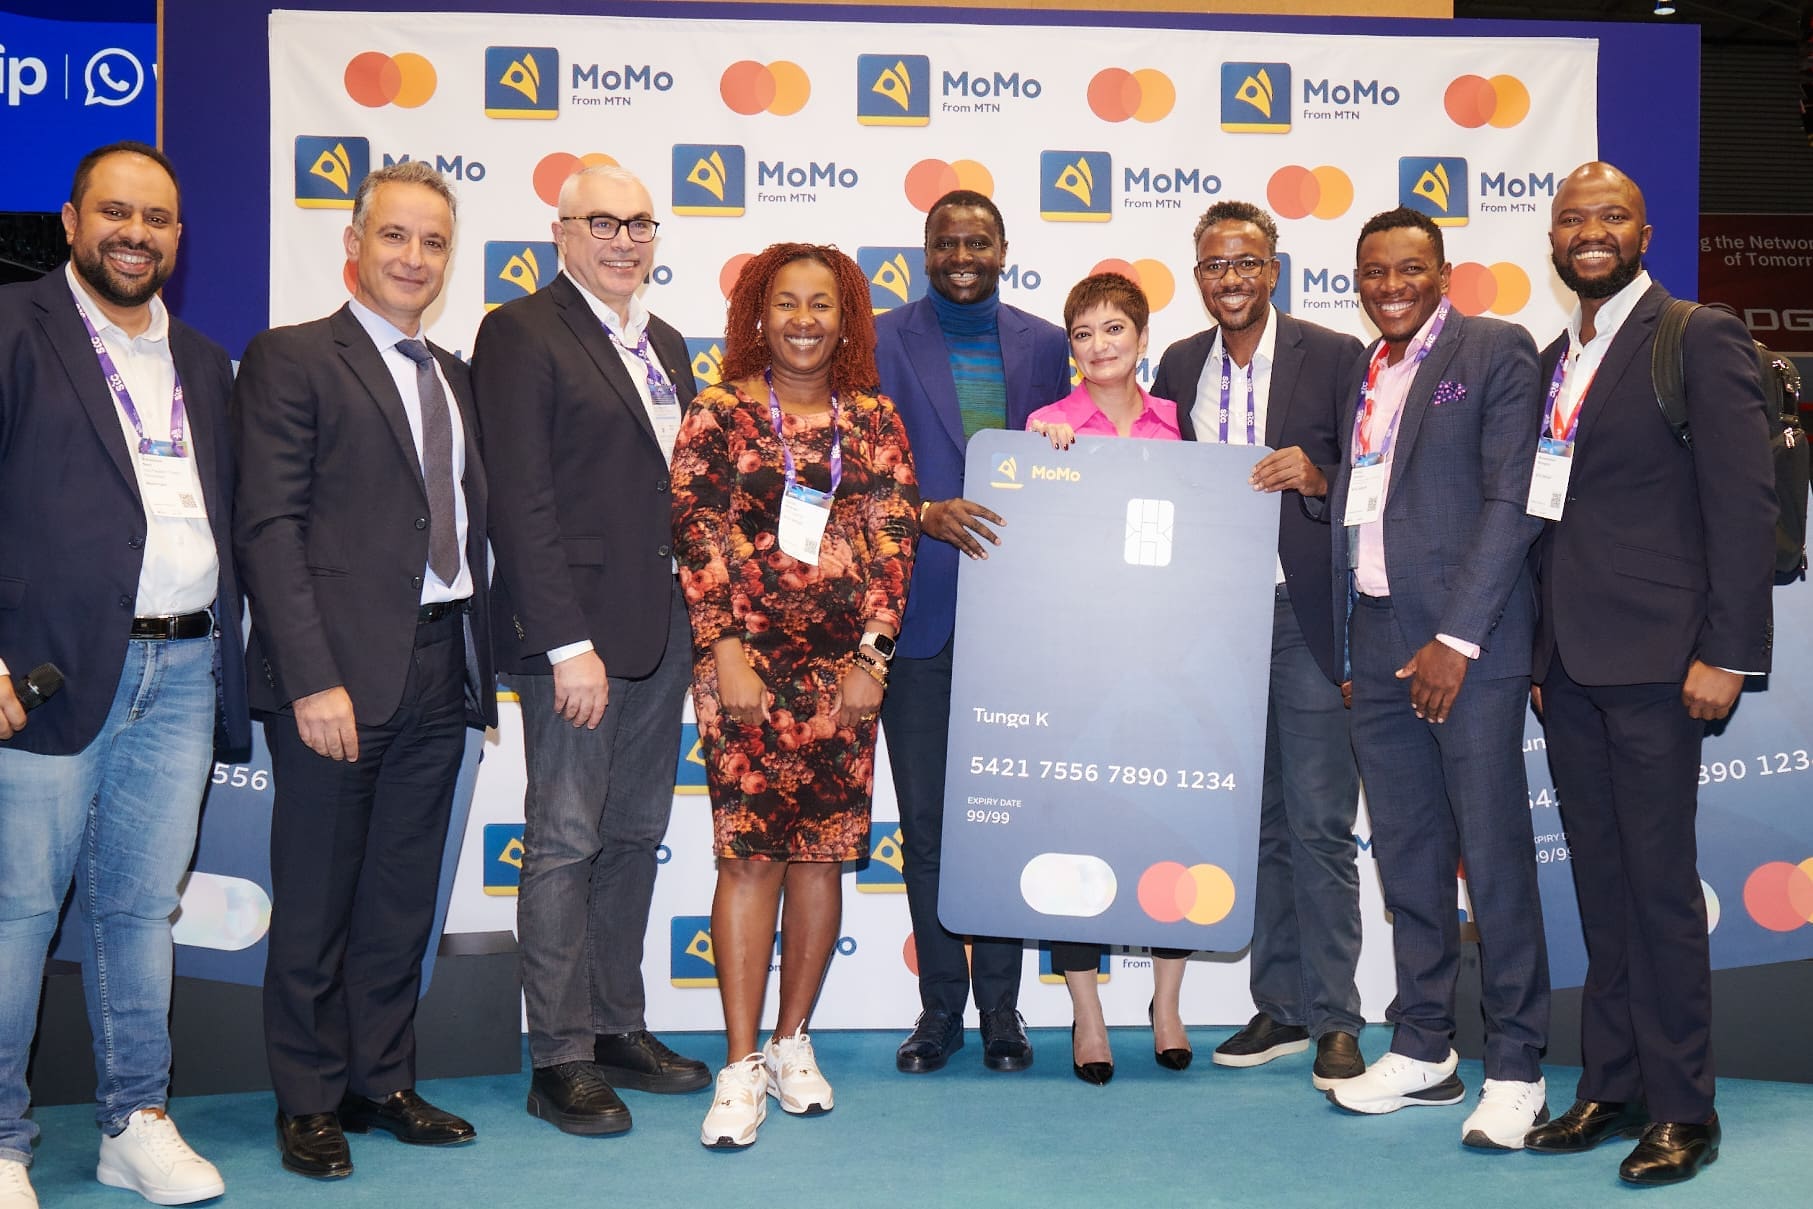 Mastercard and MTN Group Fintech partnership to launch a prepaid virtual card tailored for MTN's MoMo customers